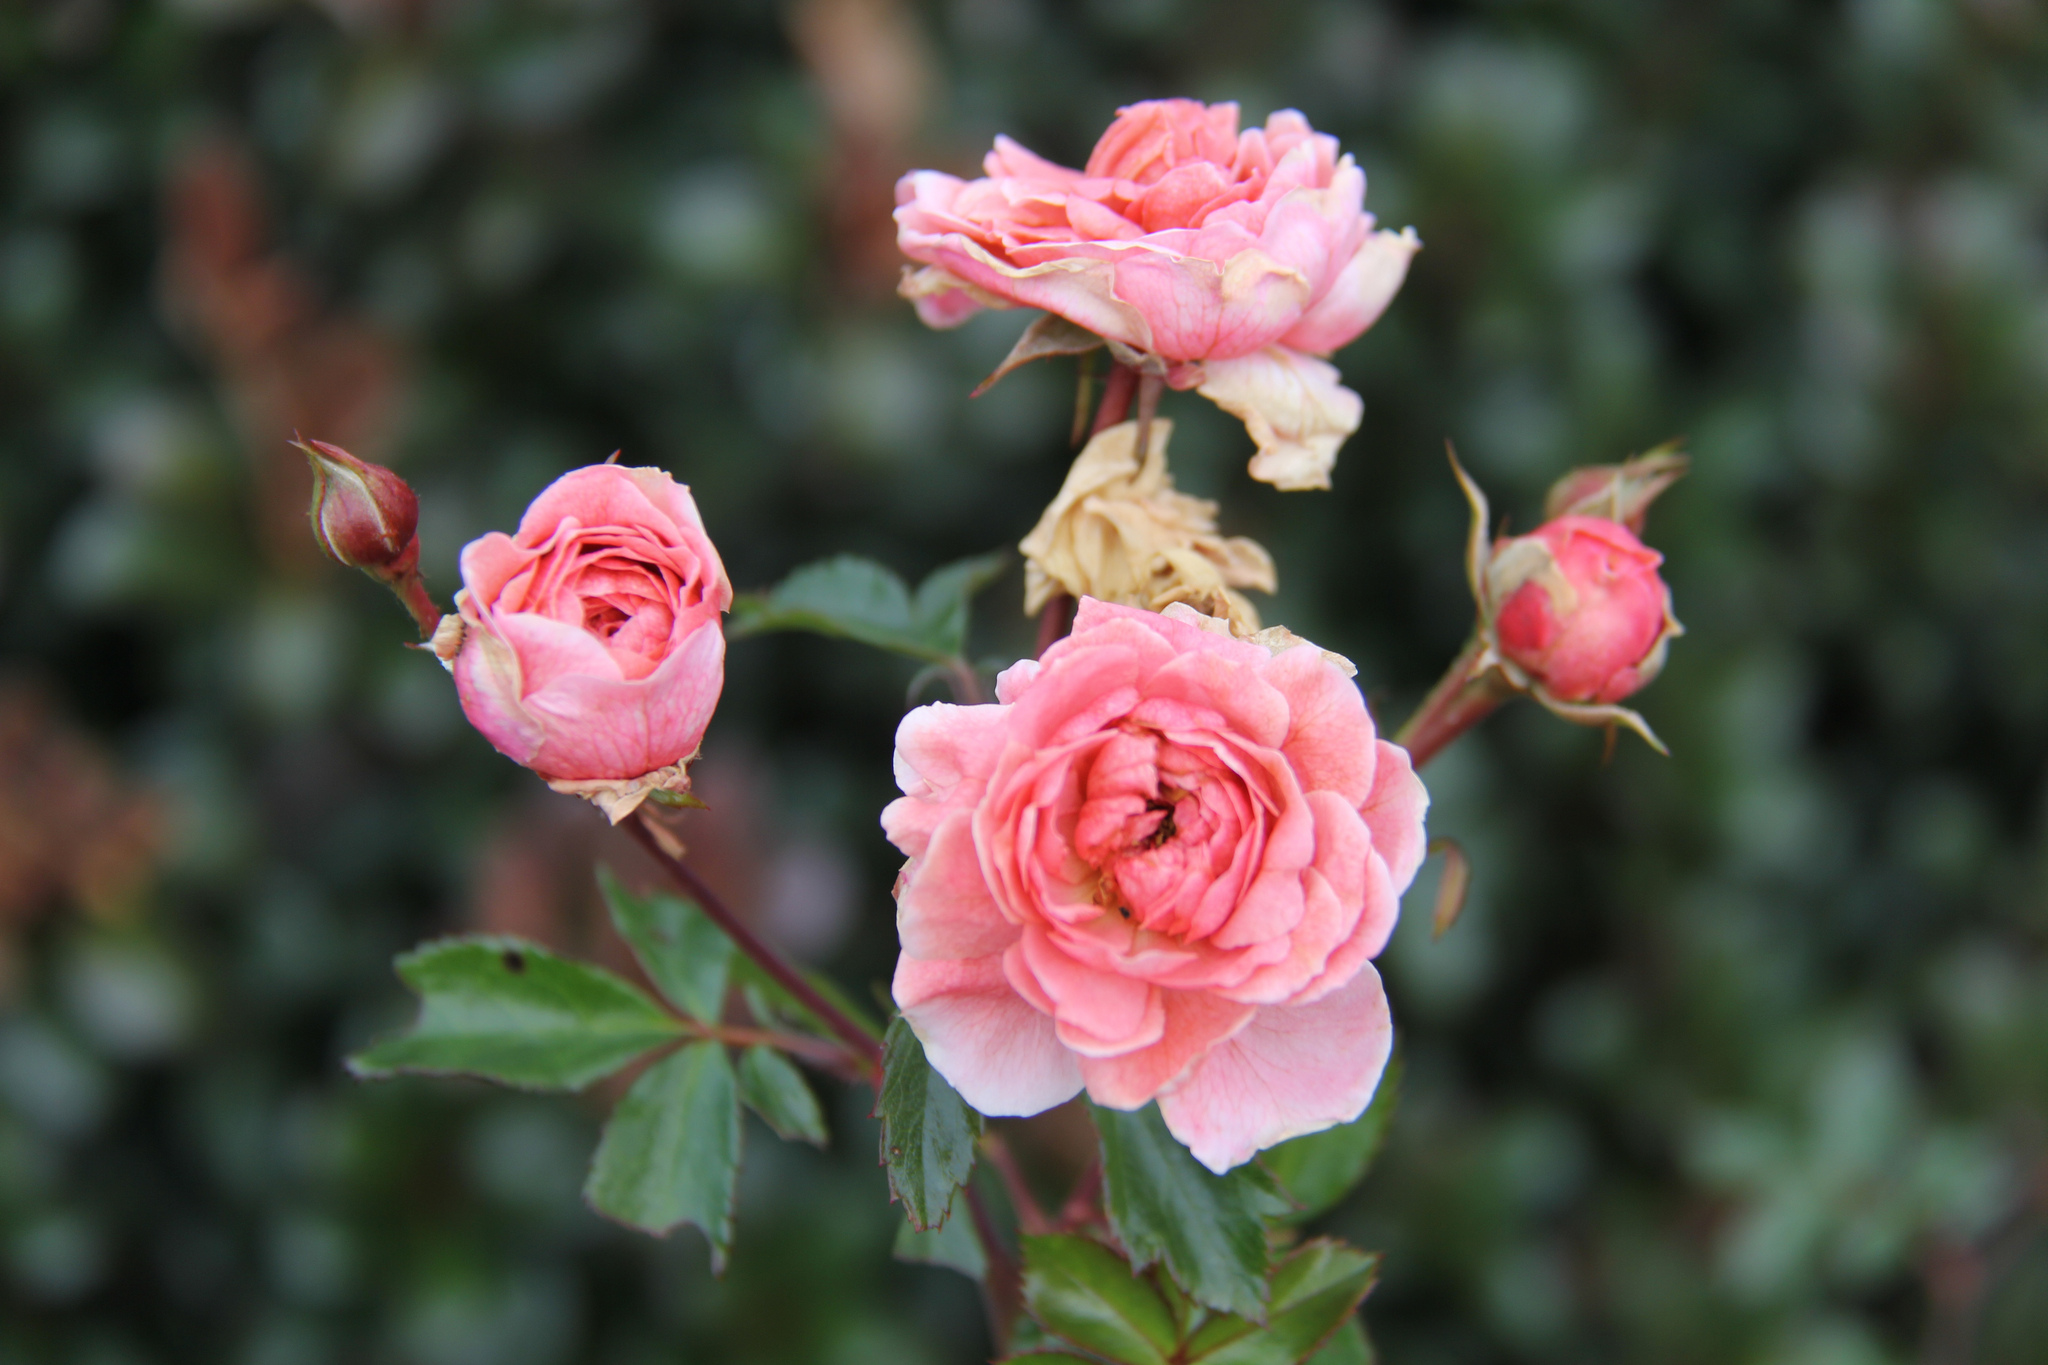 CAES NEWSWIRE | Homegrown Roses